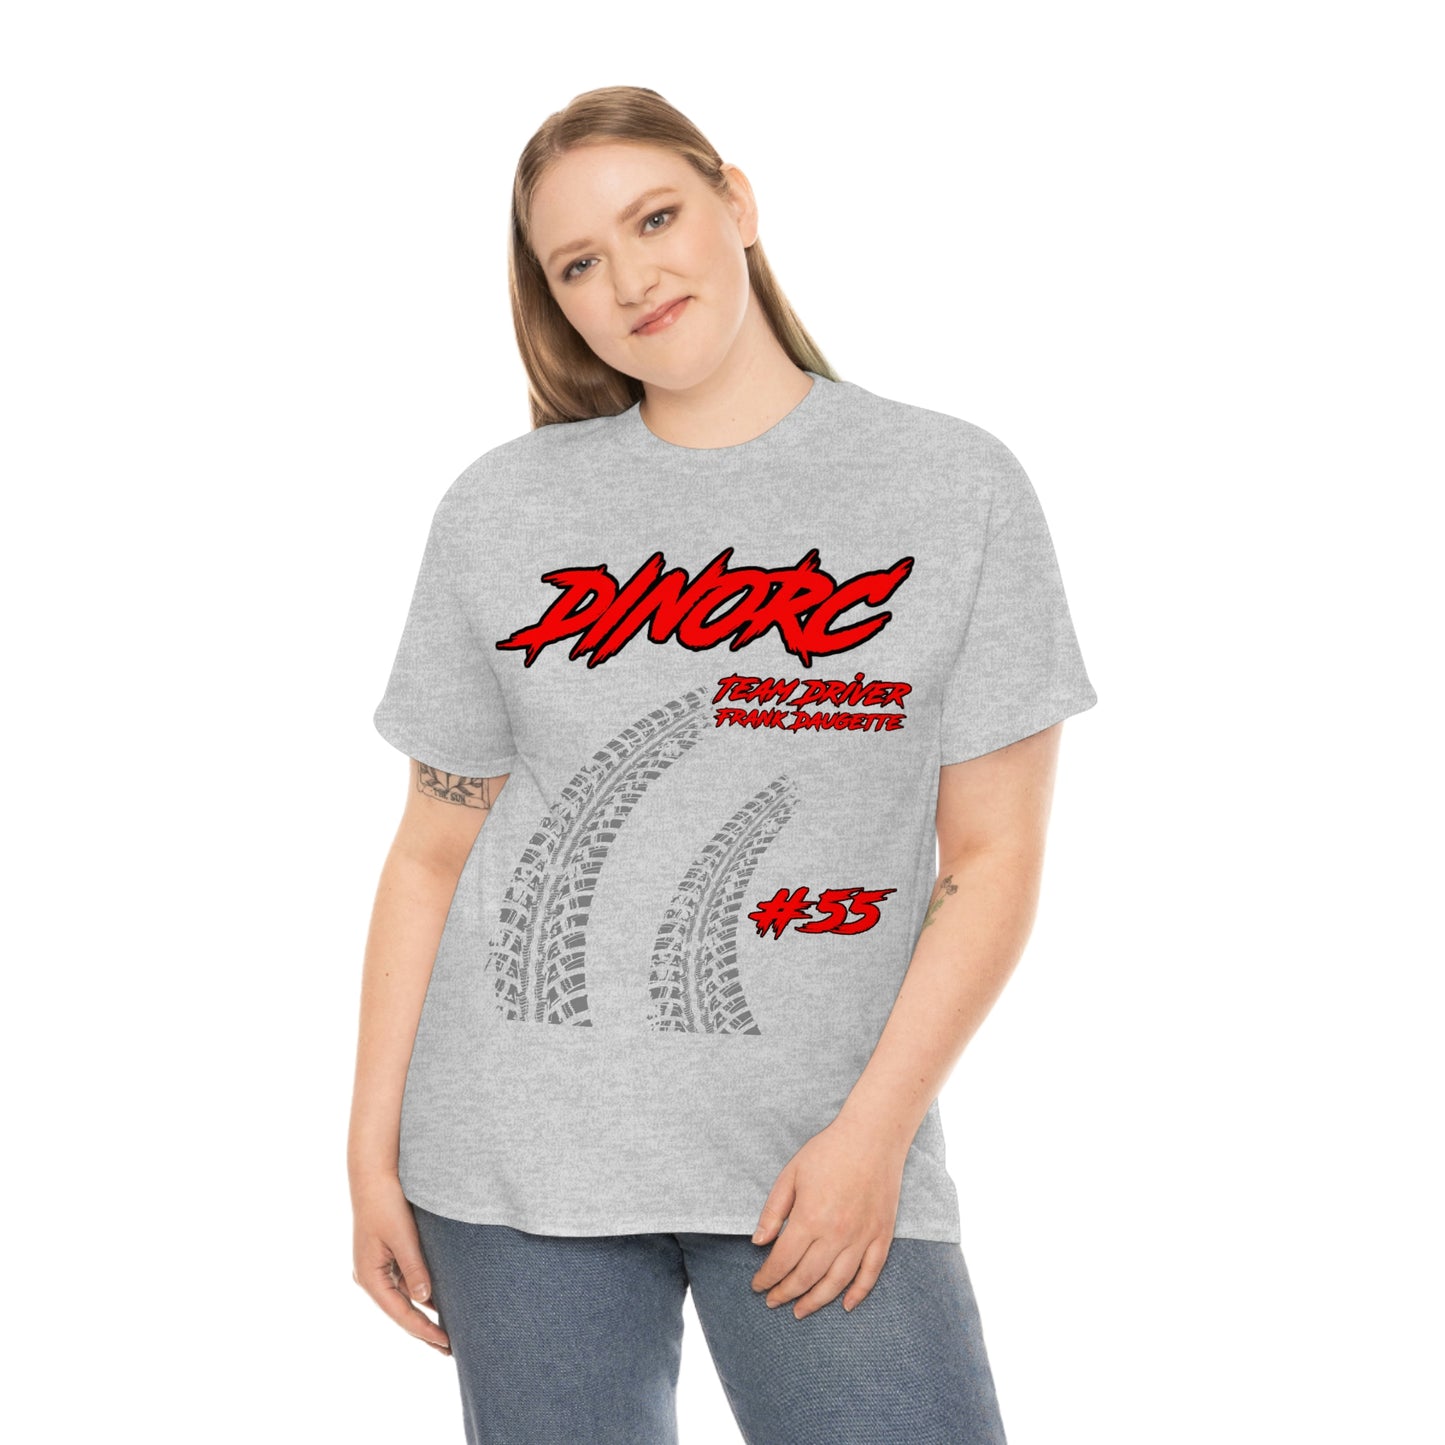 Team Drivers Logos for Frank Daugette Front and Back DinoRc Logo T-Shirt S-5x 5 colors